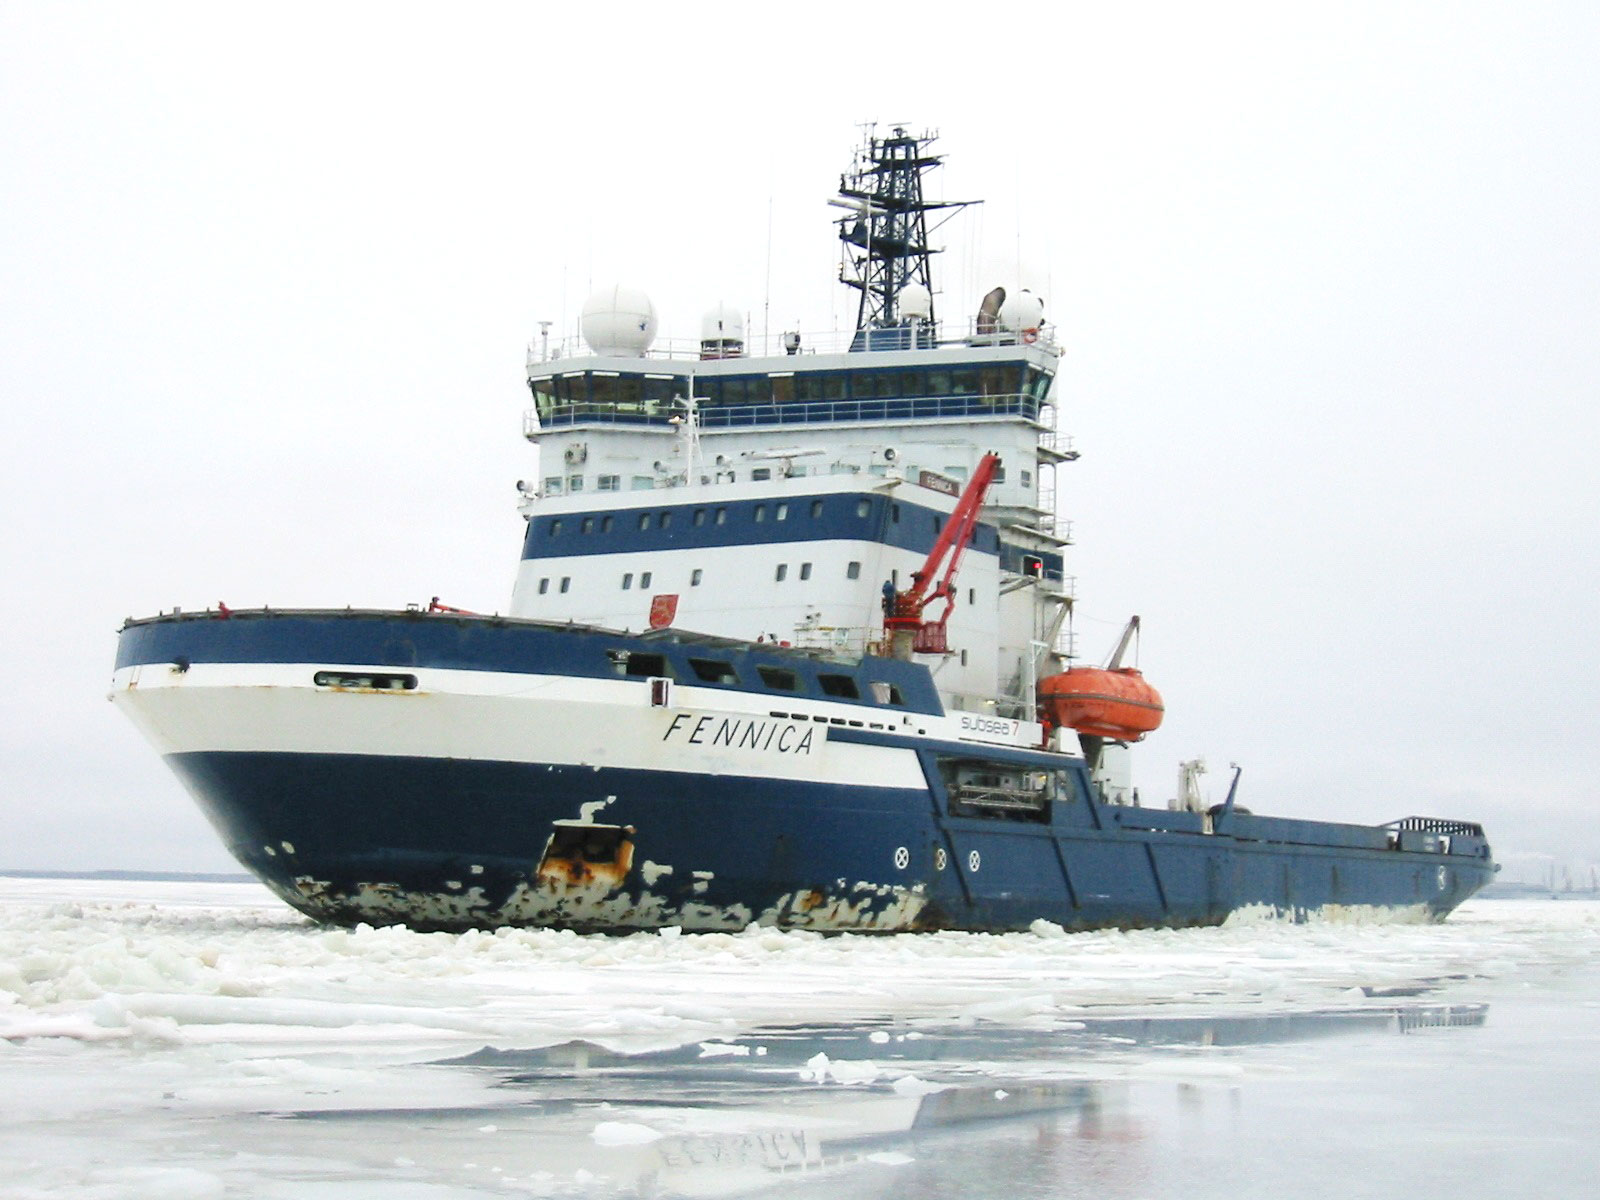 Already fifth multipurpose icebreaker designed by ILS to be deployed in Canadian waters